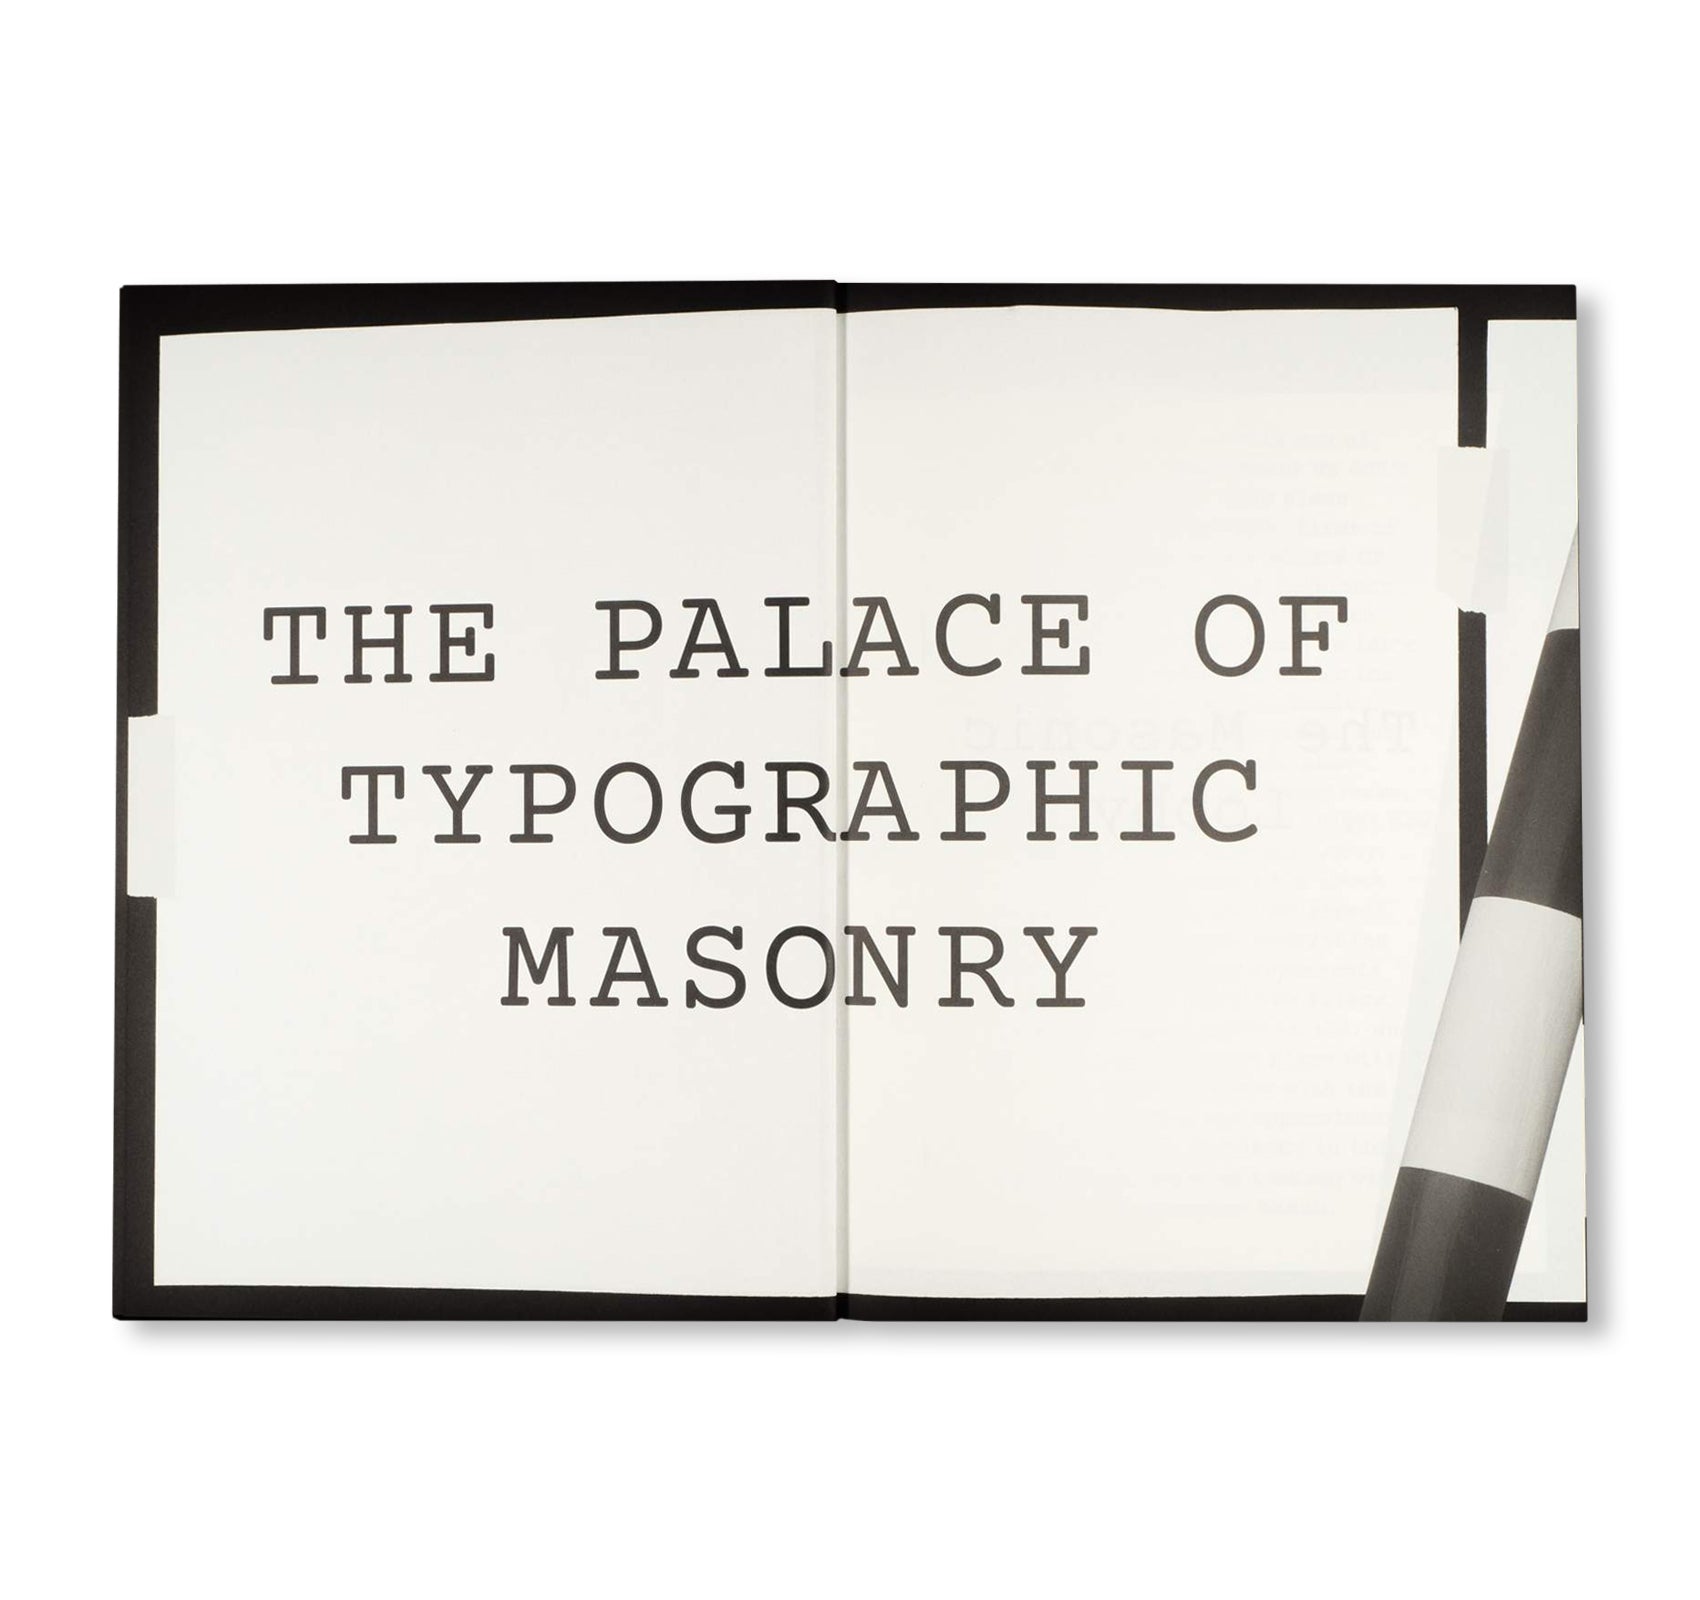 RICHARD NIESSEN: THE PALACE OF TYPOGRAPHIC MASONRY - A GUIDED TOUR BY DIRK VAN WEELDEN by Richard Niessen